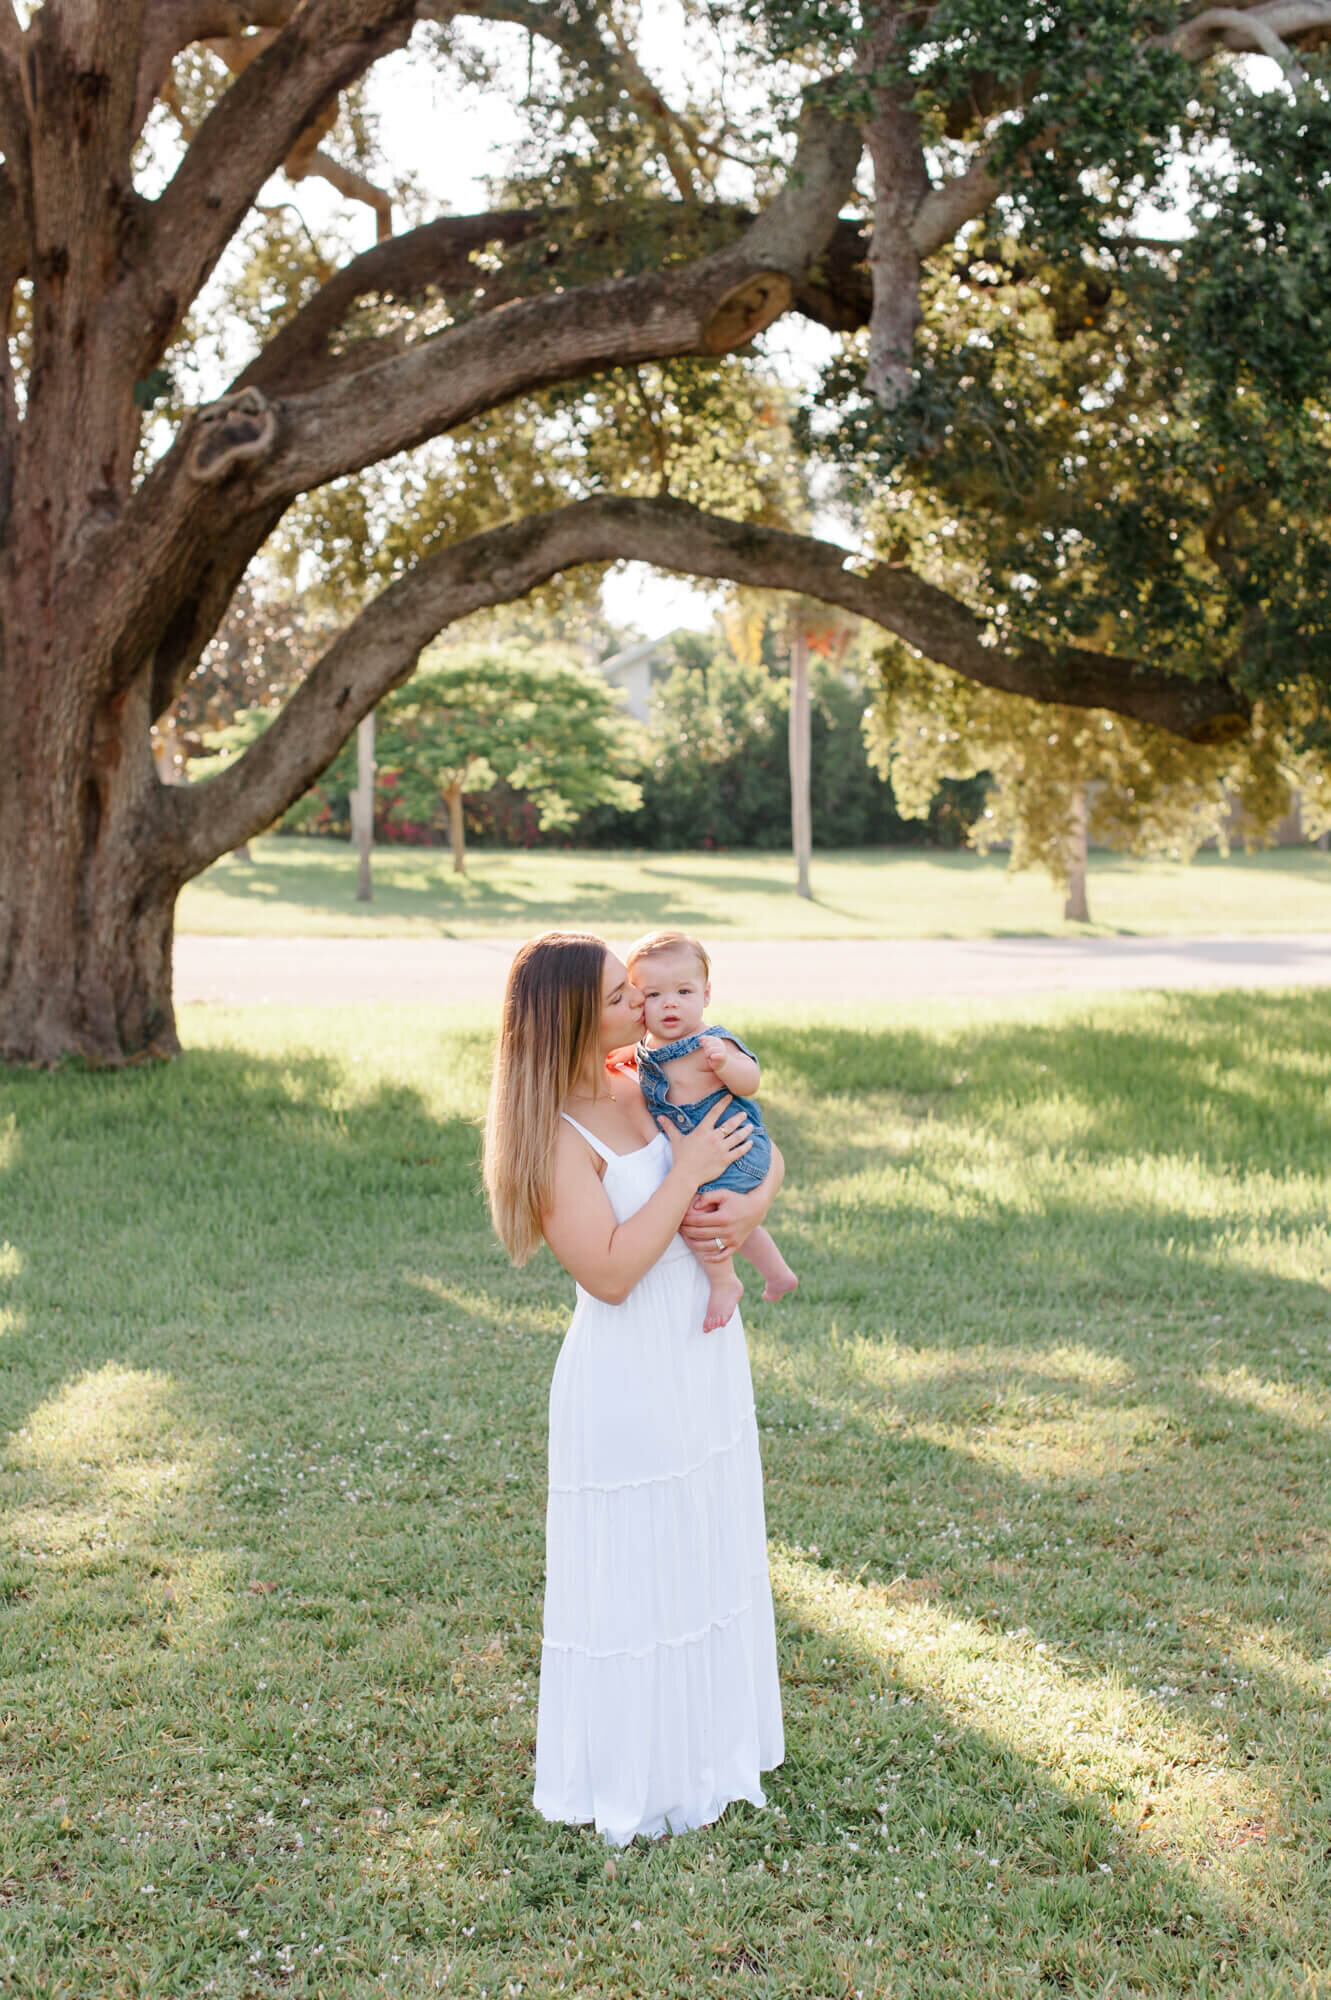 Mom holds her son and kisses his cheek while standing underneath an oak tree